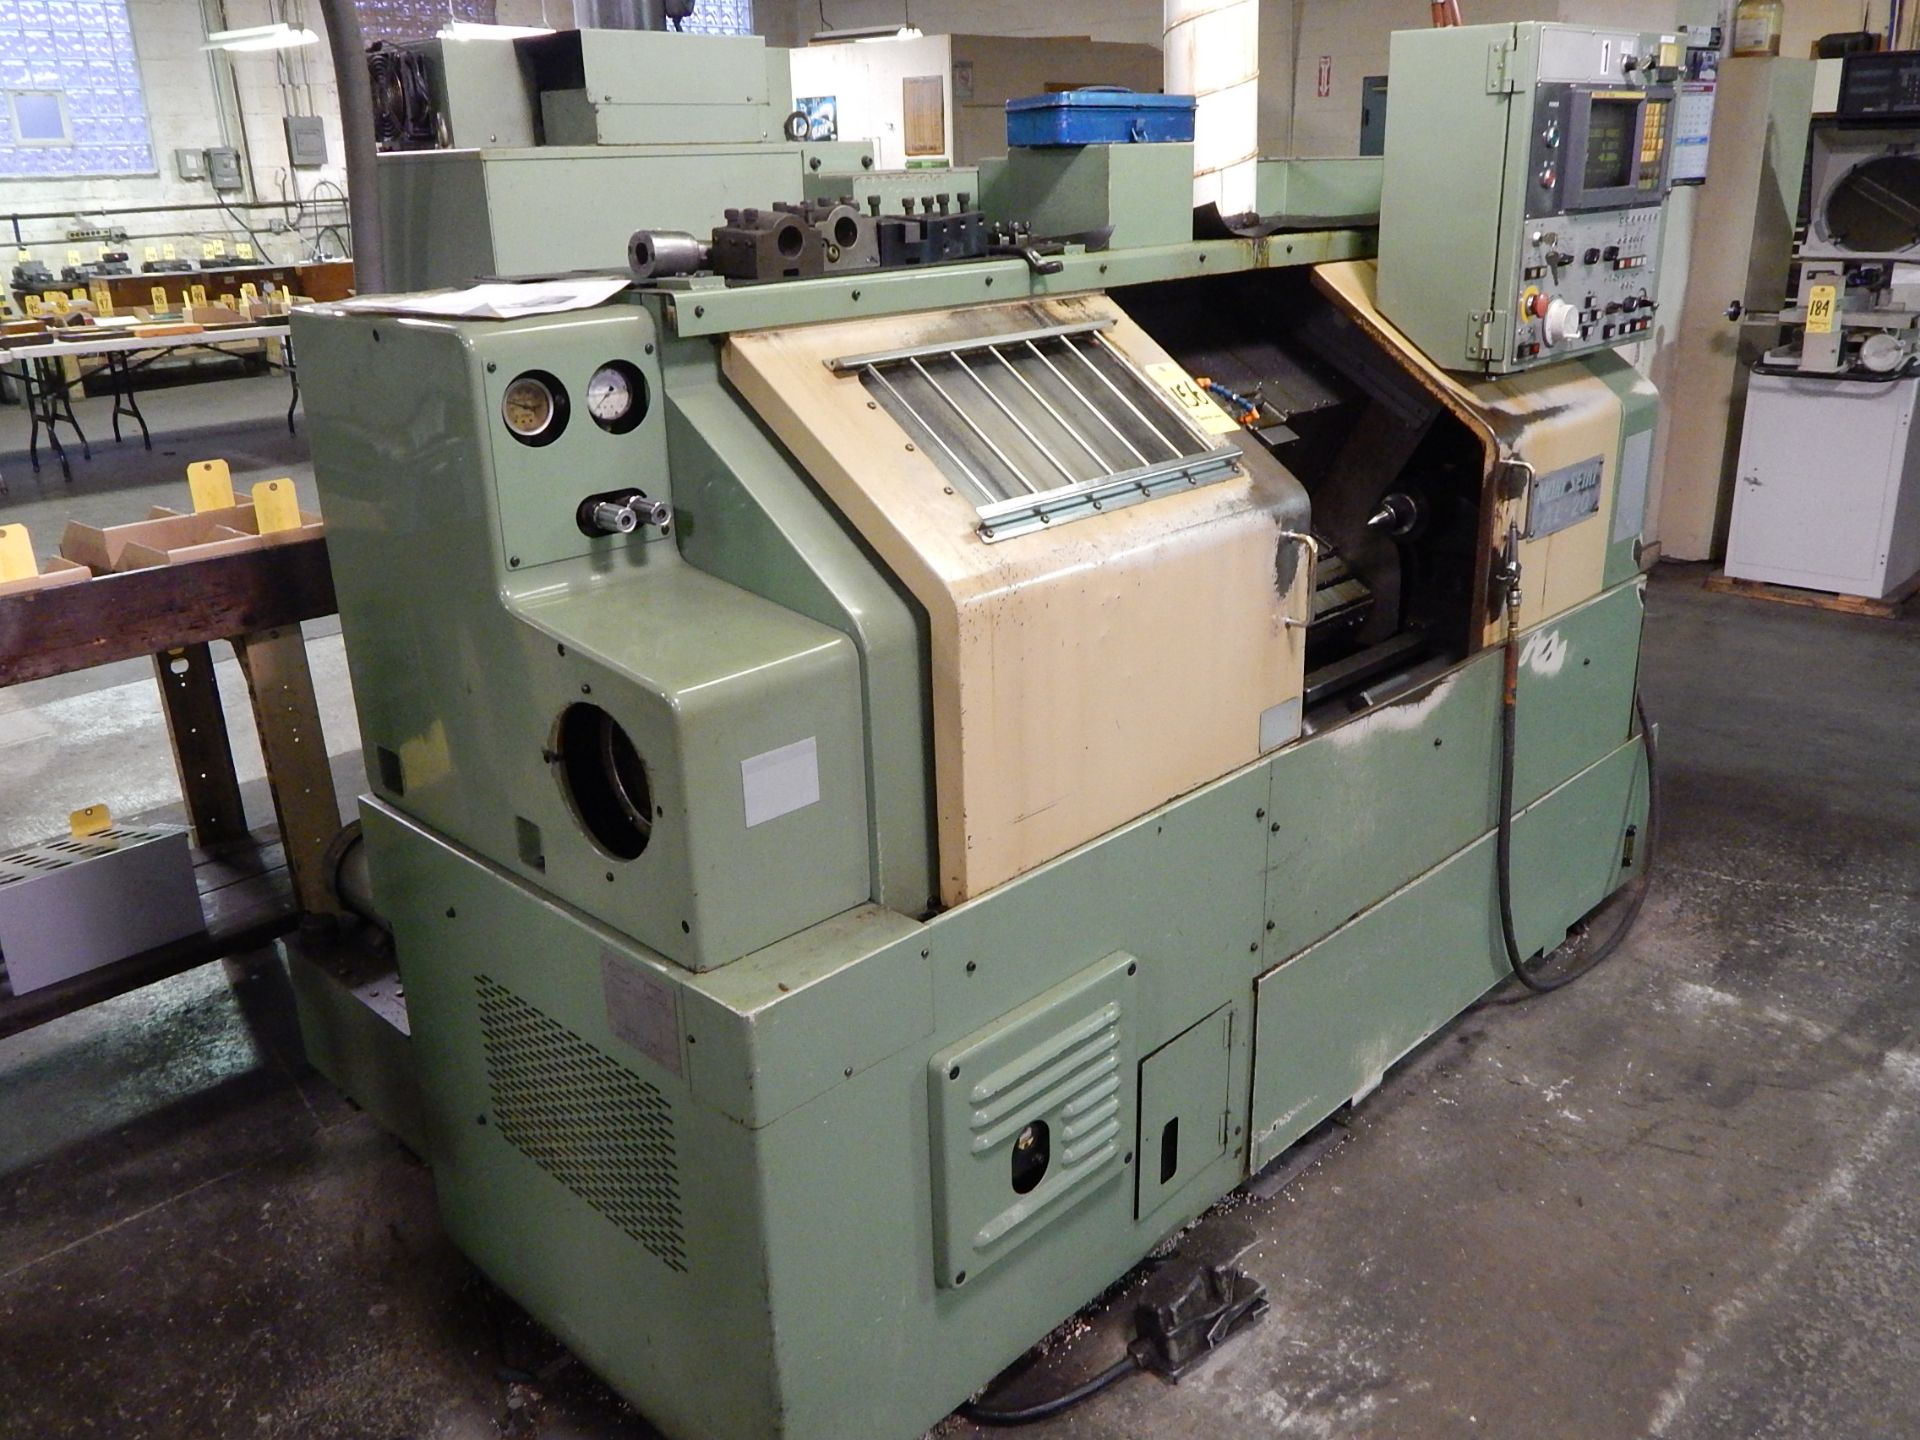 Mori-Seiki AL-20, CNC Turning Center, s/n 2796, 8 In. 3-Jaw Chuck, 8 Station Turret, Tailstock, - Image 8 of 12